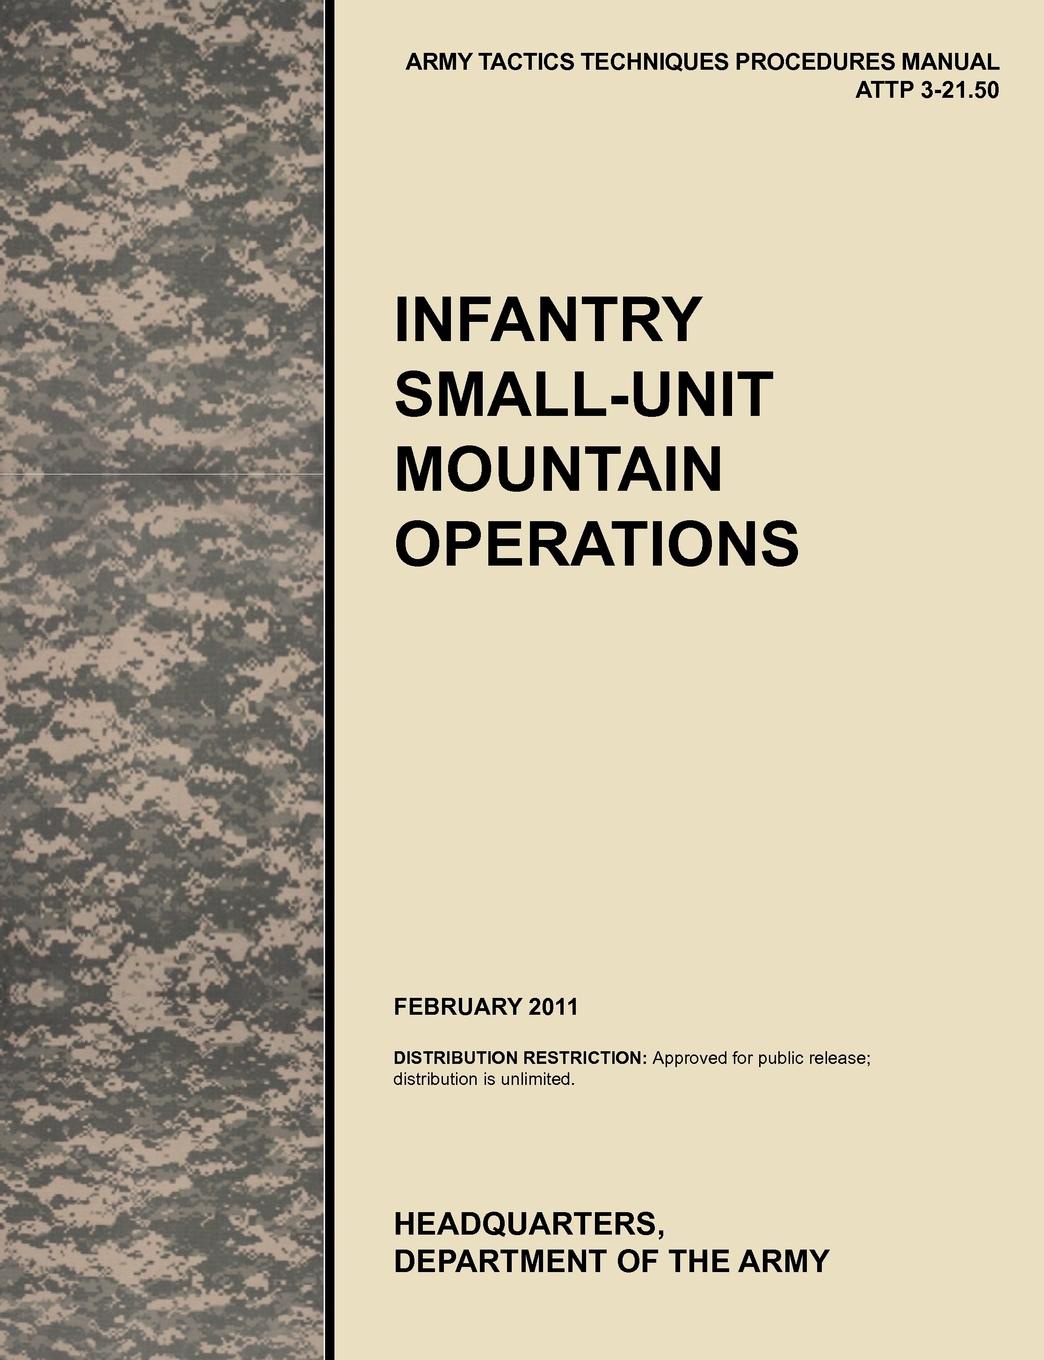 U. S. Army Training and Doctrine Command, Army Maneuver Center of Excellence, U. S. Department of the Infantry Small-Unit Mountain Operations. The Official U.S. Army Tactics, Techniques, and Procedures (Attp) Manual 3.21-50 (February 2011)